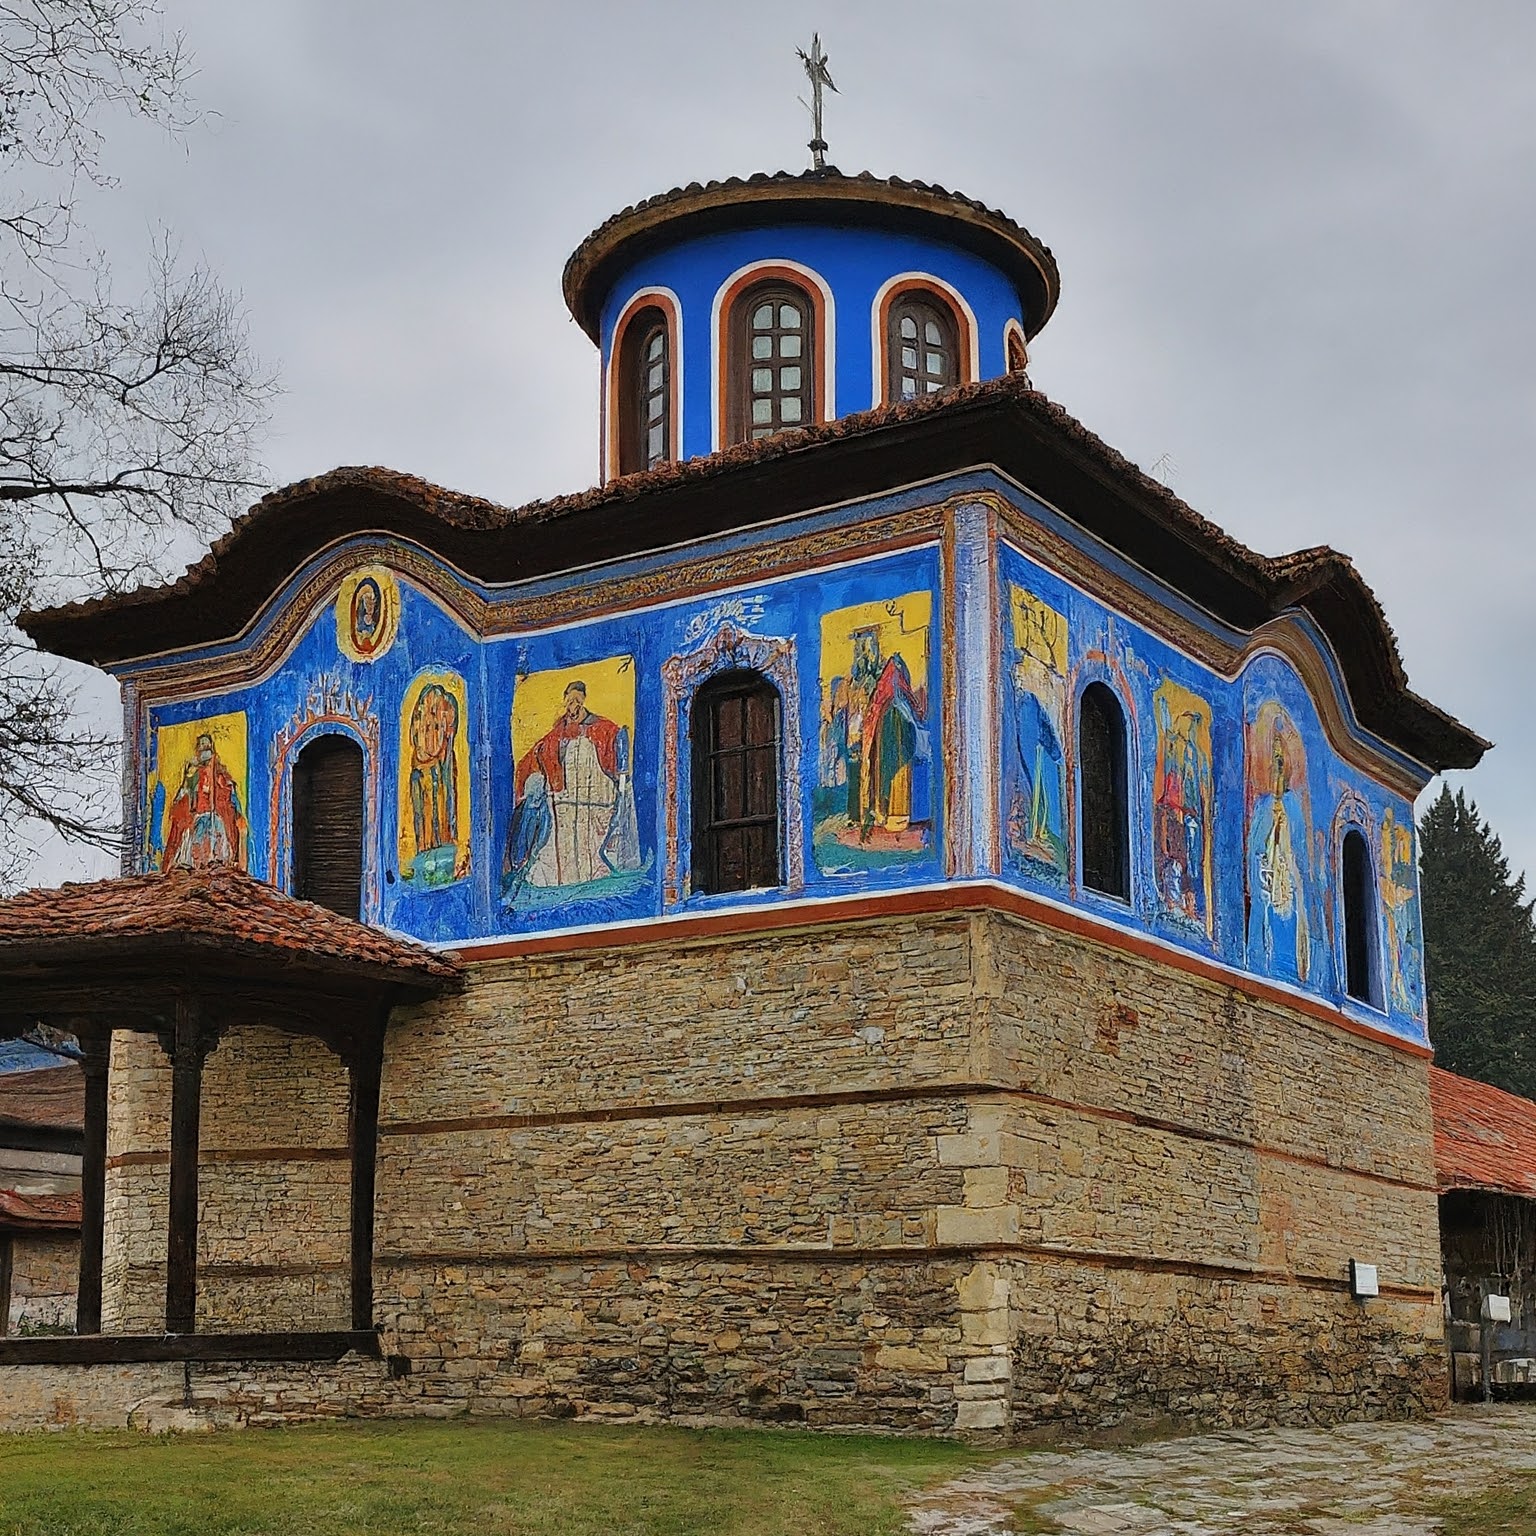 The Church of the Assumption of the Virgin Mary in Koprivshtitsa, Bulgaria, with its five domes.